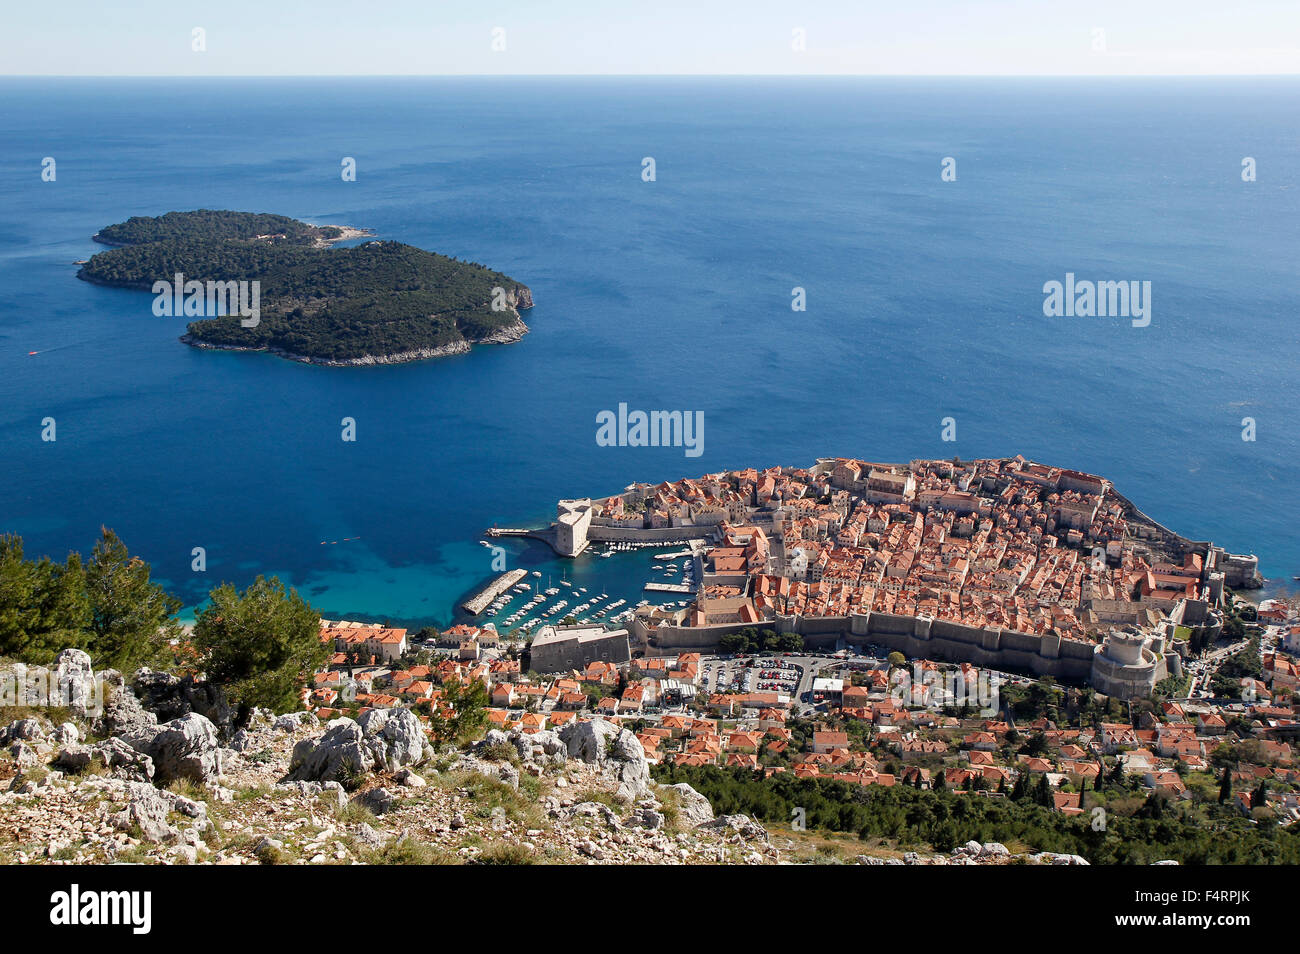 Historic centre of Dubrovnik and Lokrum island, view from Mount Srd, Croatia Stock Photo